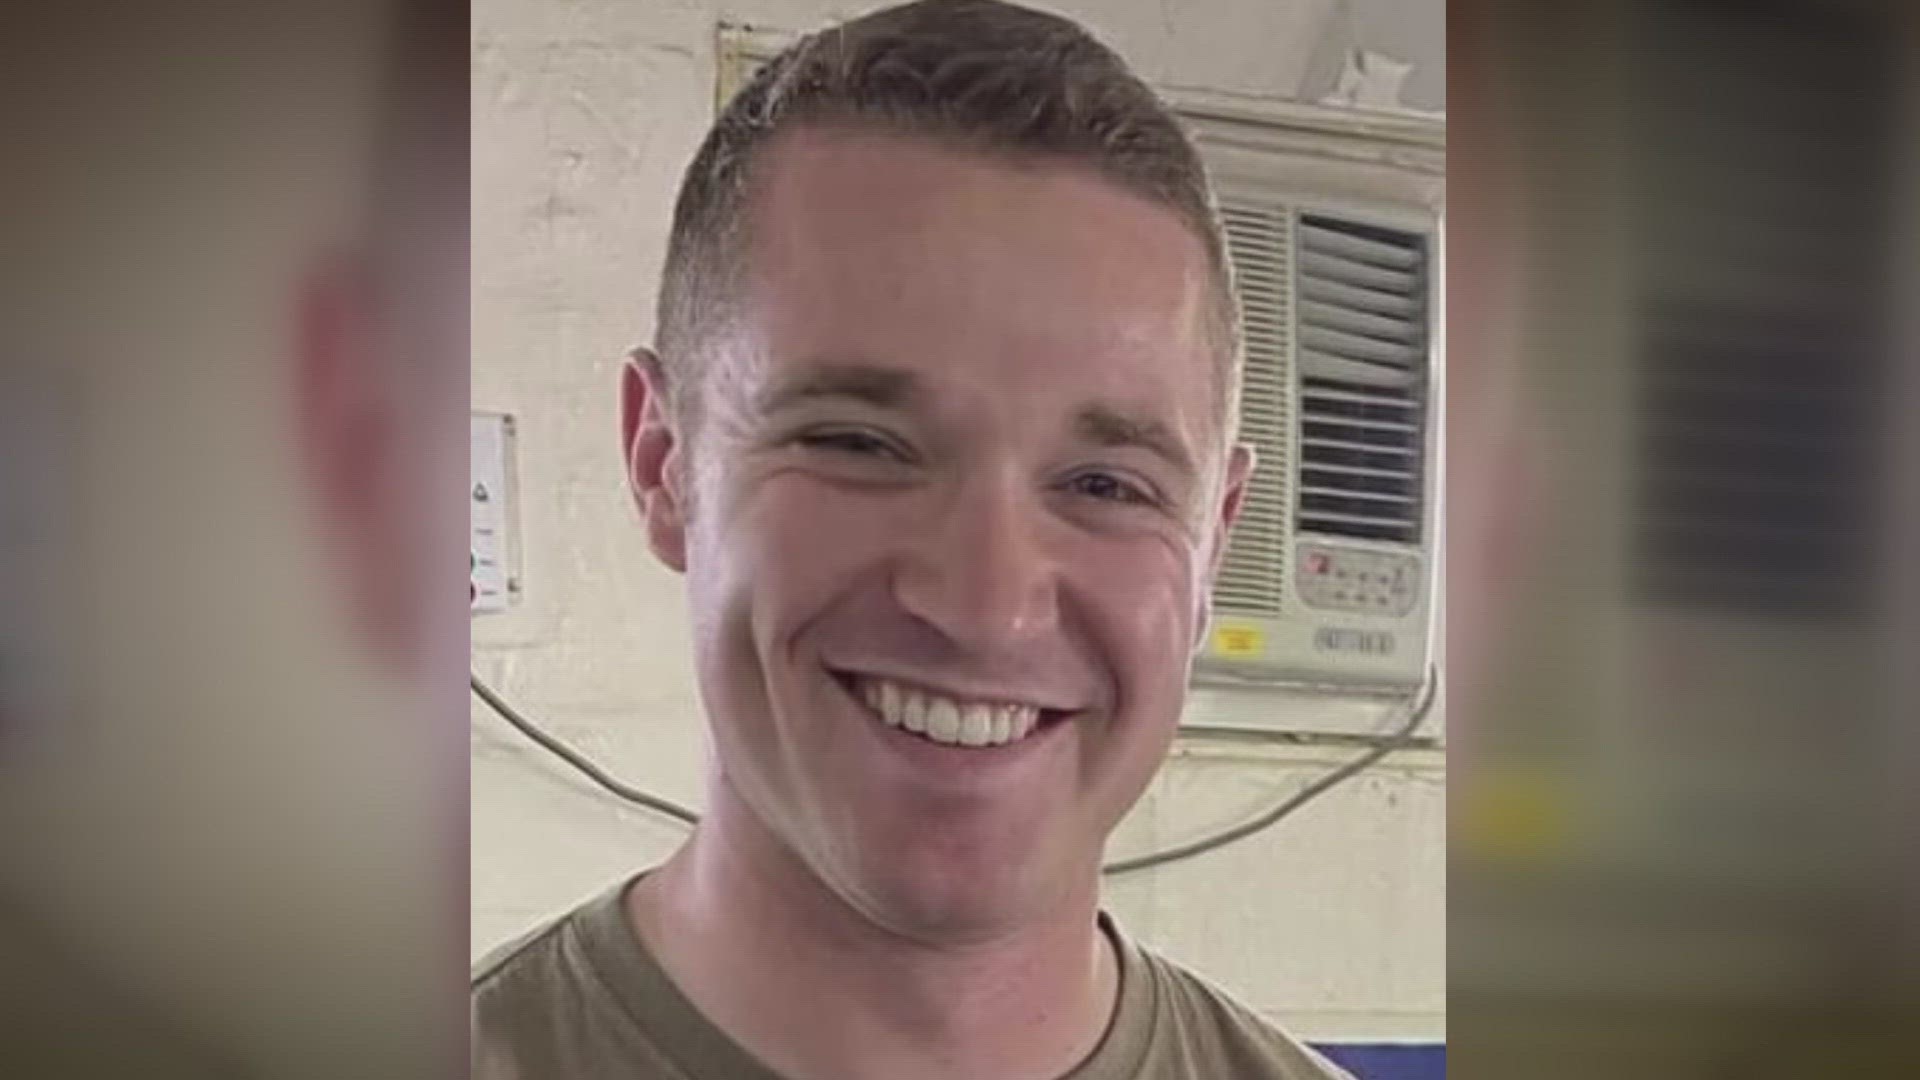 Sgt. Andrew P. Southard, 27, was killed in a helicopter crash during a training exercise Friday, the Department of Defense announced.